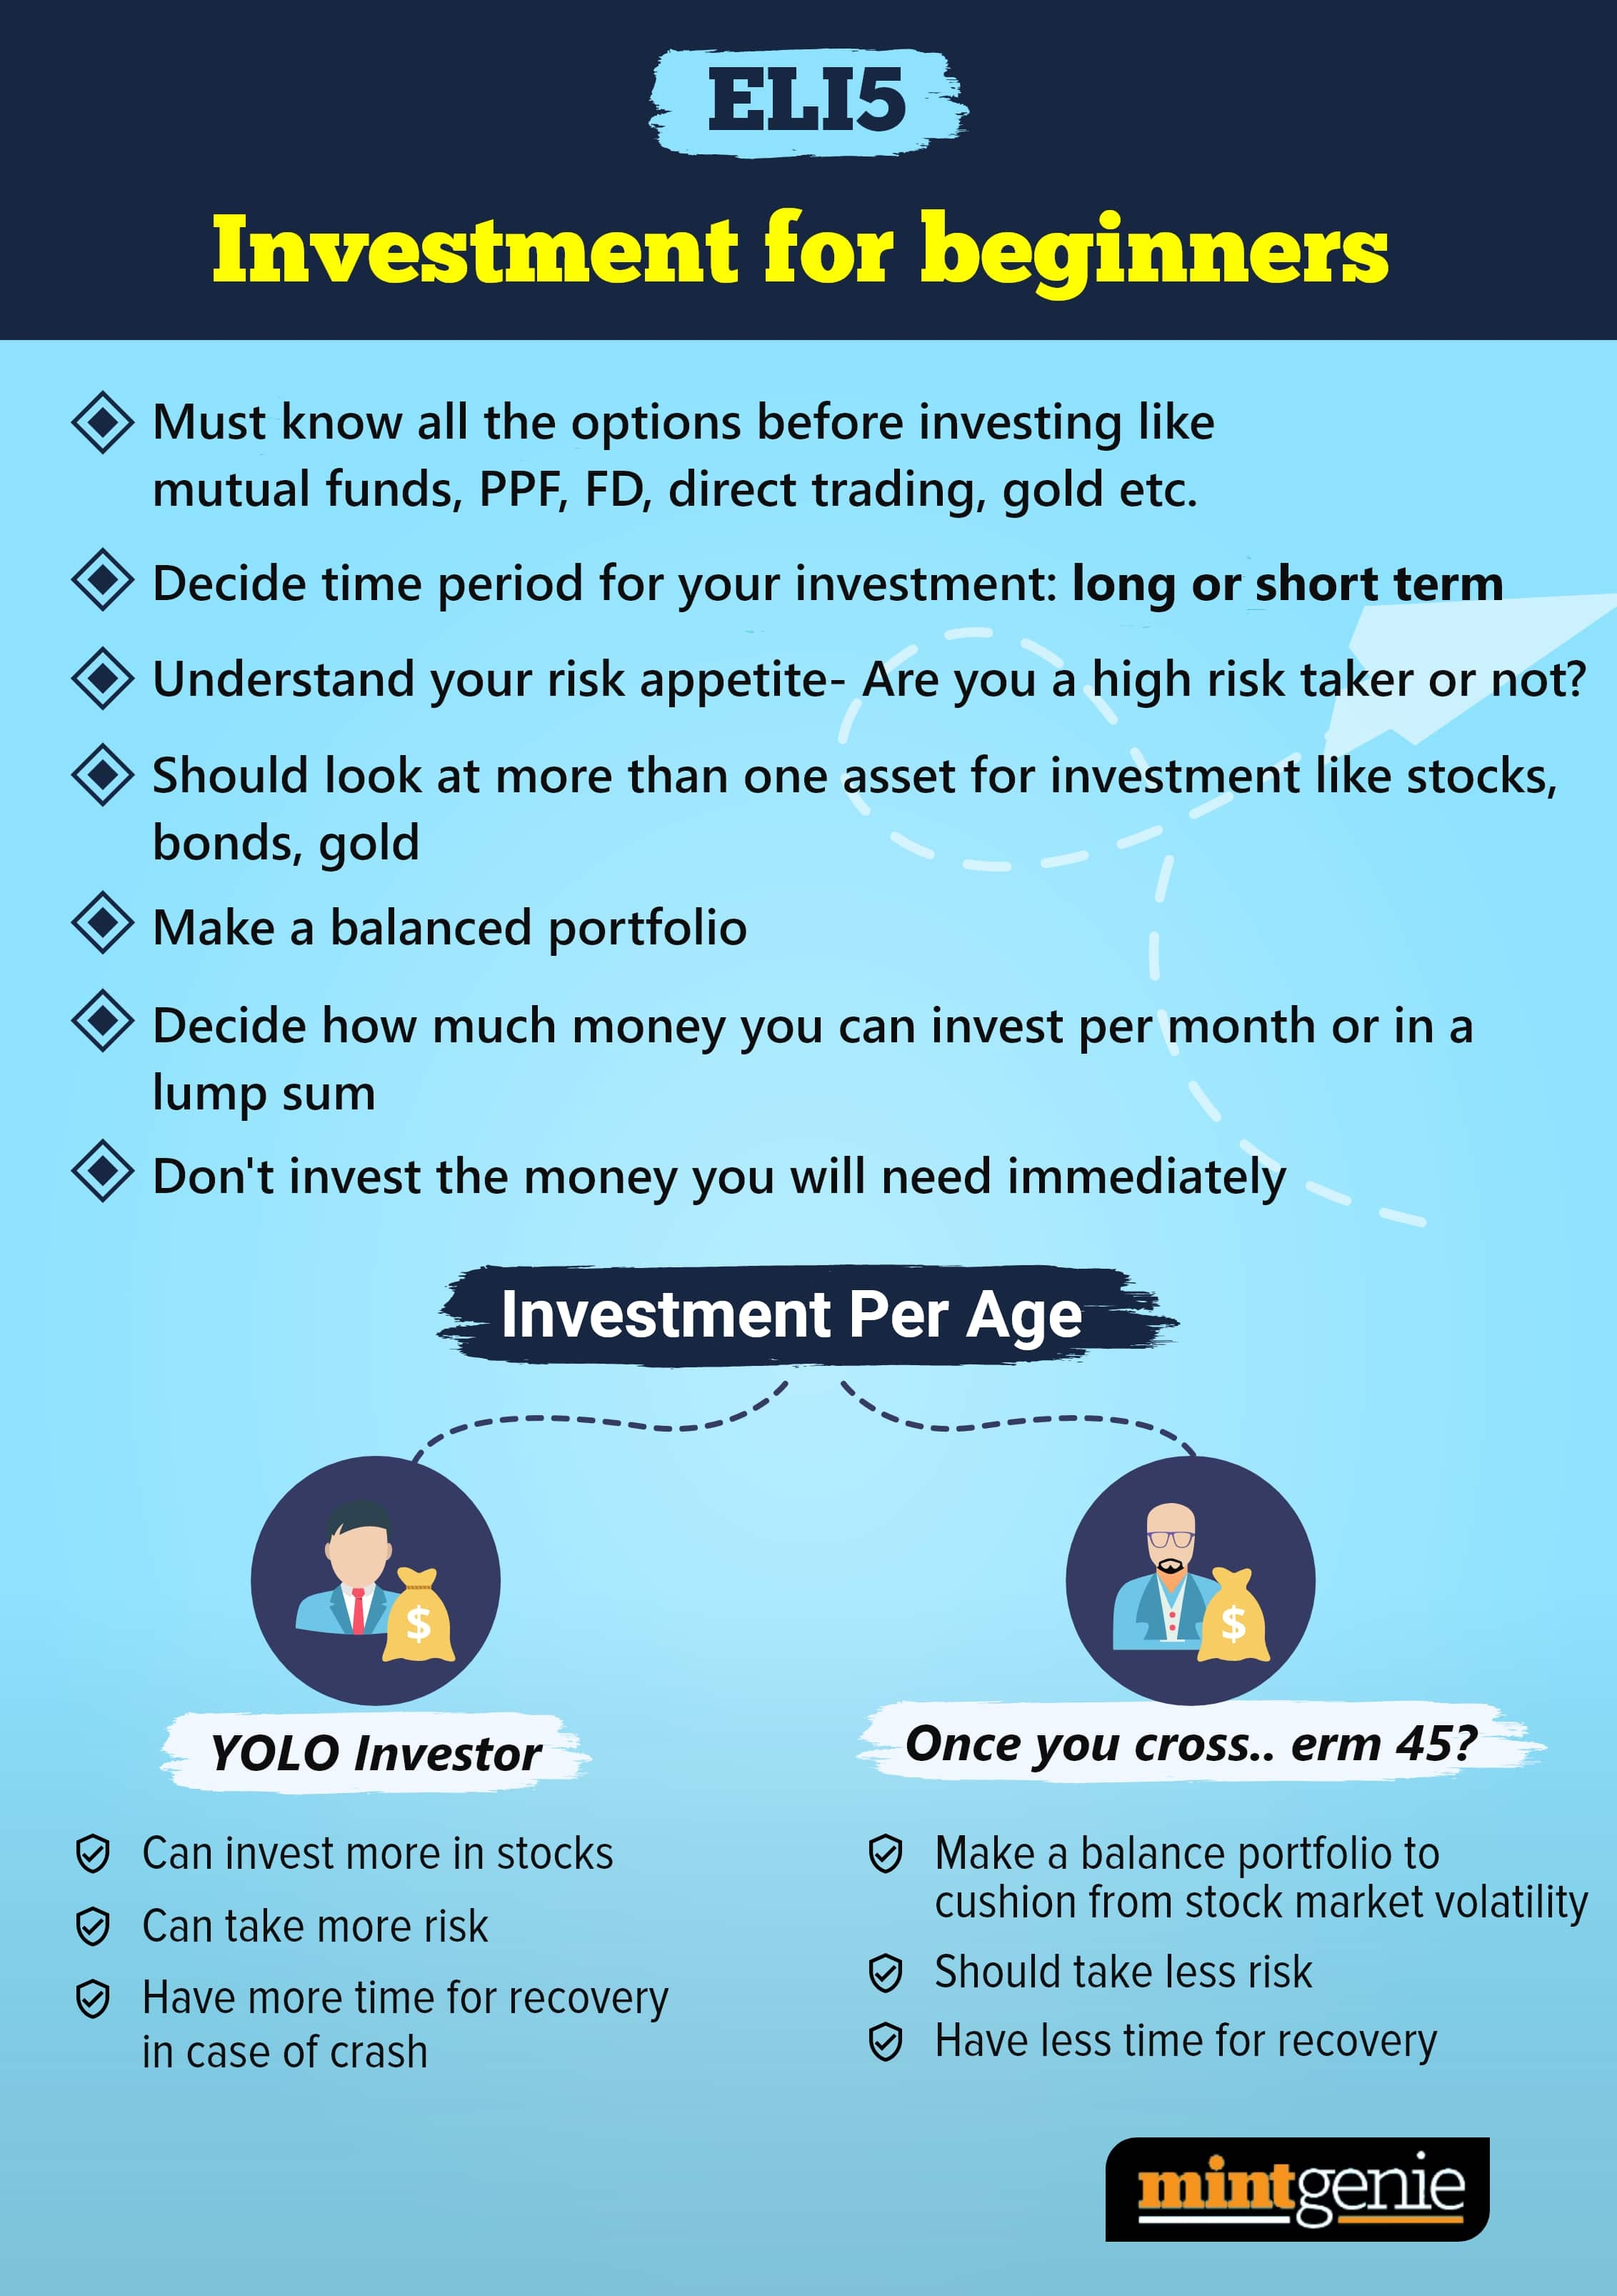 New-time investors must know all the options they have before investing.